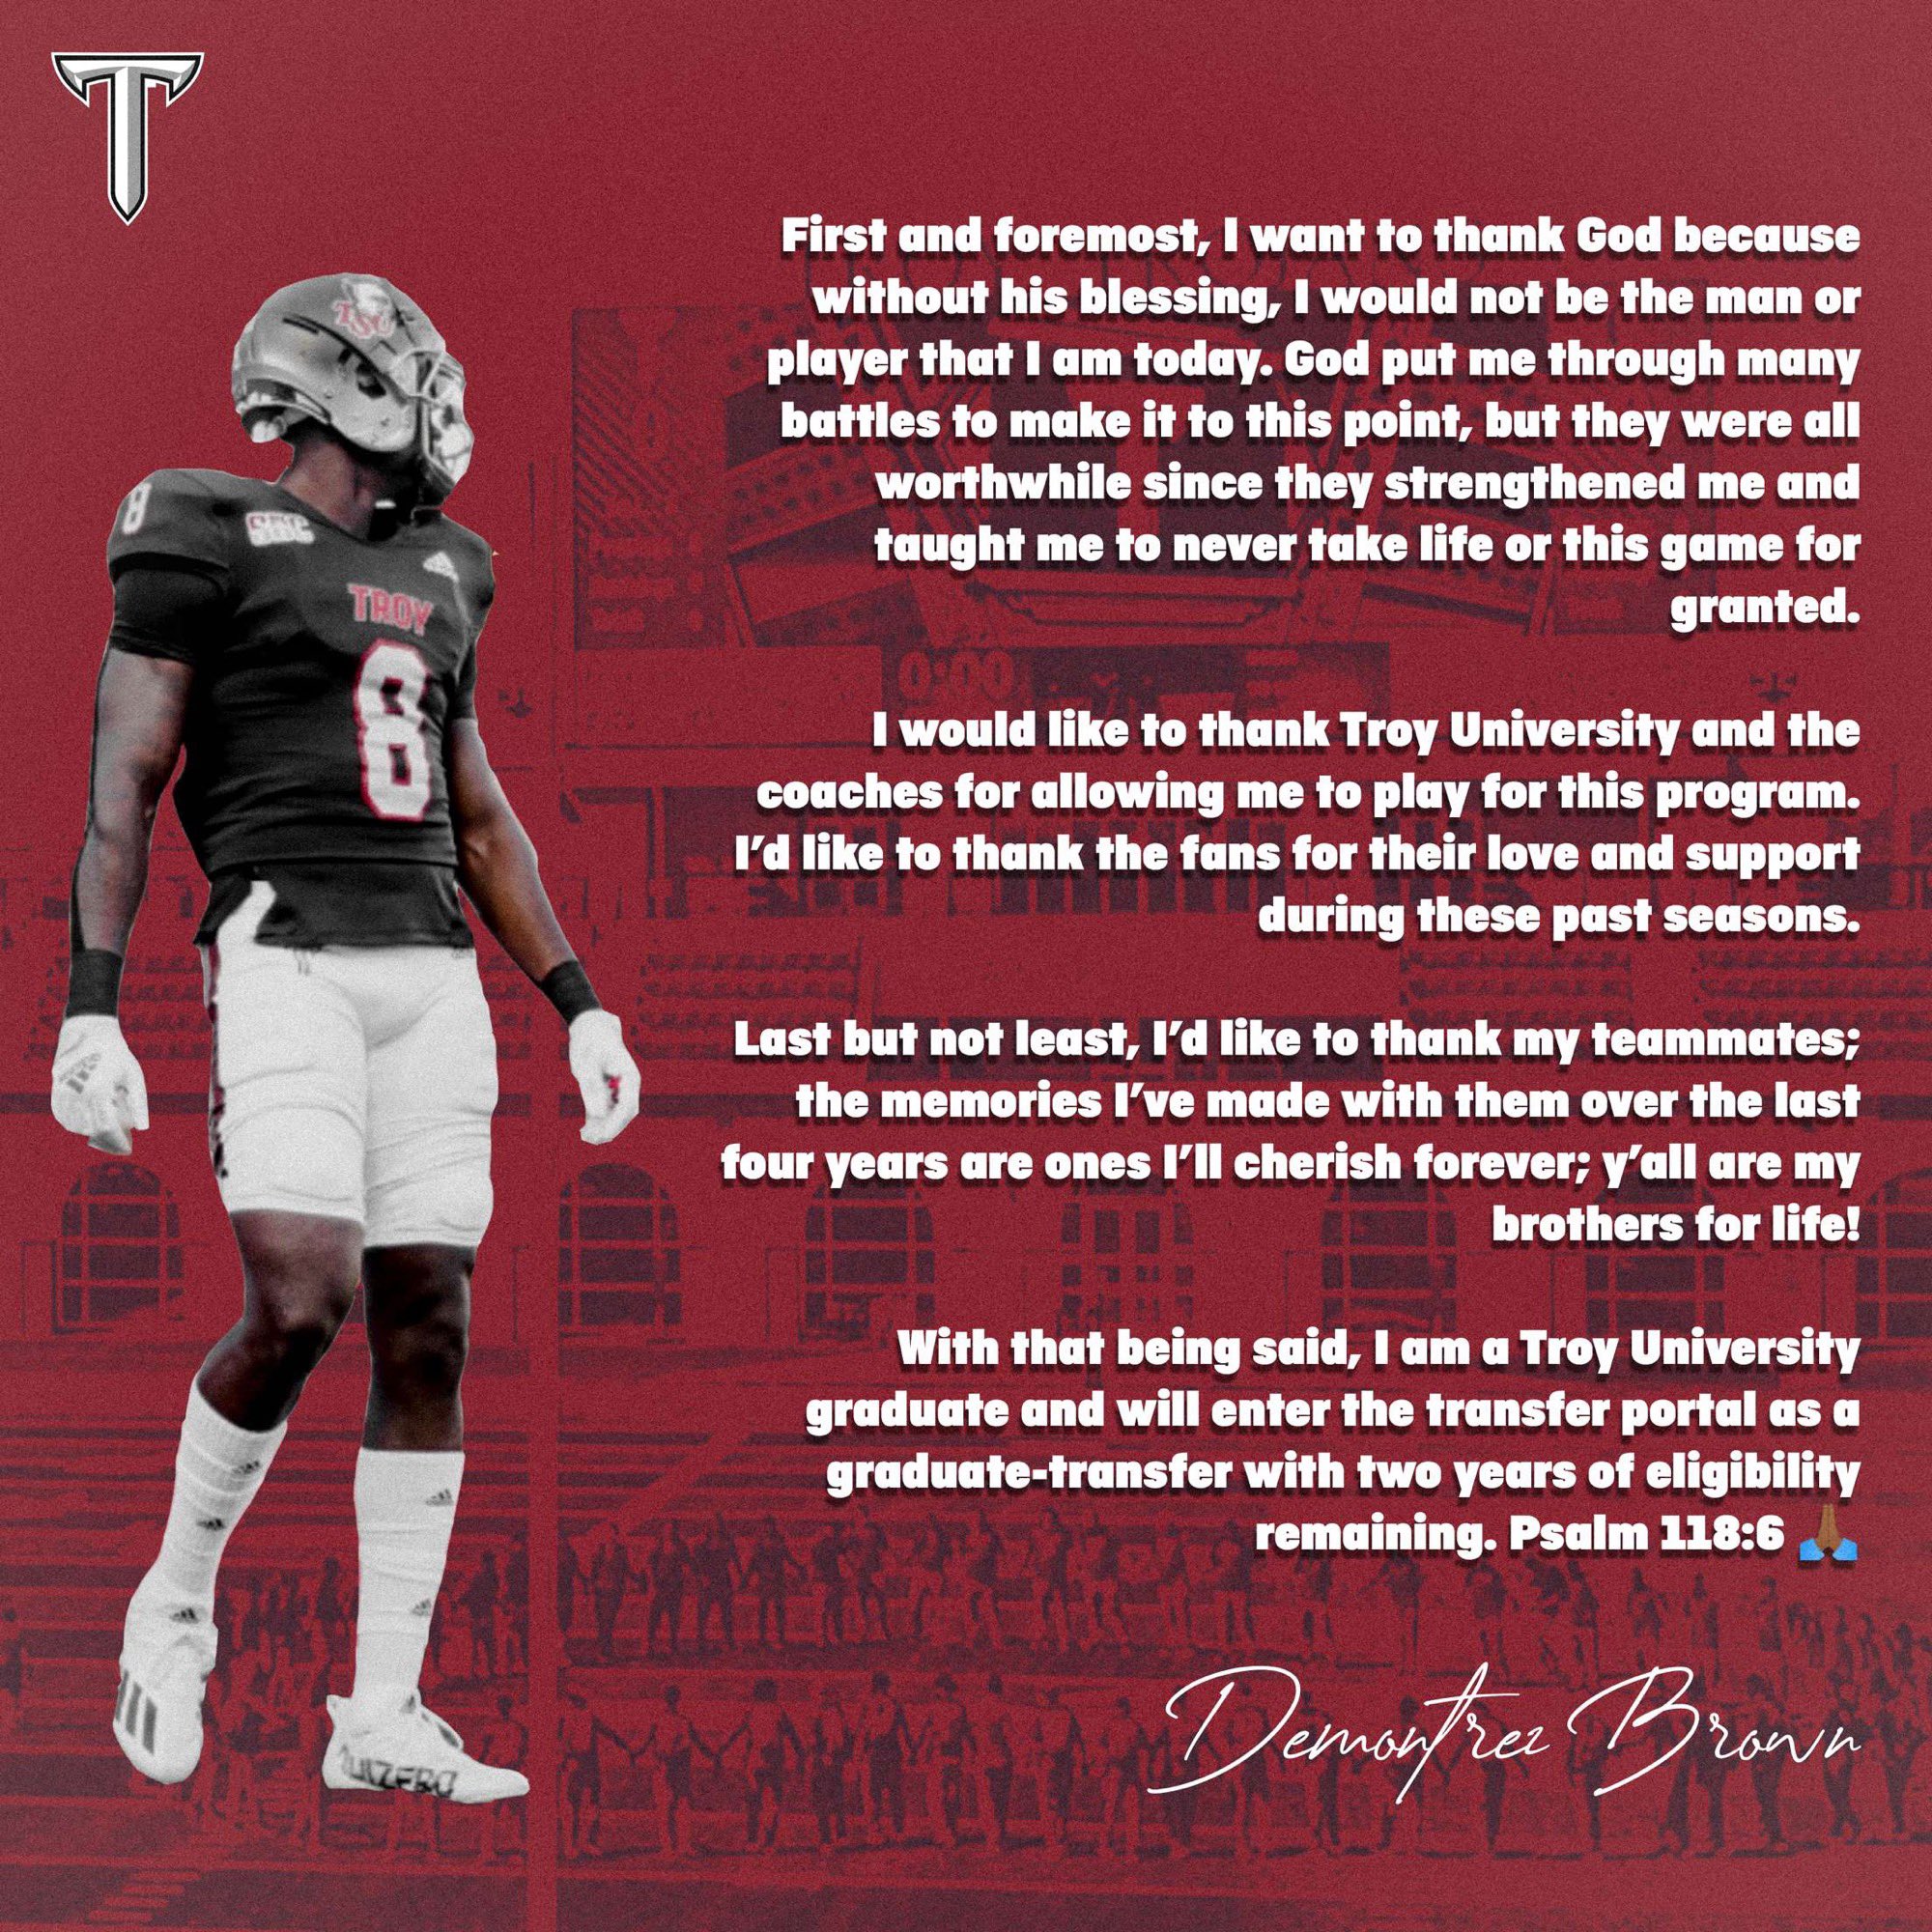 T First and foremost; want to thank God because without his blessing; would not be the man or player that um Cod put me through many battles to make it to this point; but they were all worthwhile since they strengthened me and taught me to never take life or this game for Wem granted: would Iike to thank Troy University and the couches for 'allowing me to play for this program Fd like to thank the fans for their love and support during these past sedsons Last but not Iedst; Id Iike t0 thank Iedmmales; the memories ['ve made with them over the Iast four years are ones |'II cherish forever; Y'all are my brothers for Iifel With that Isaid; ! am & University graduate and will enter the transfer portal a5 a ~graduate-transfer with two years of eligibility remaining: Psalm 118.6 T73ovn today: mny" being Troy emstz